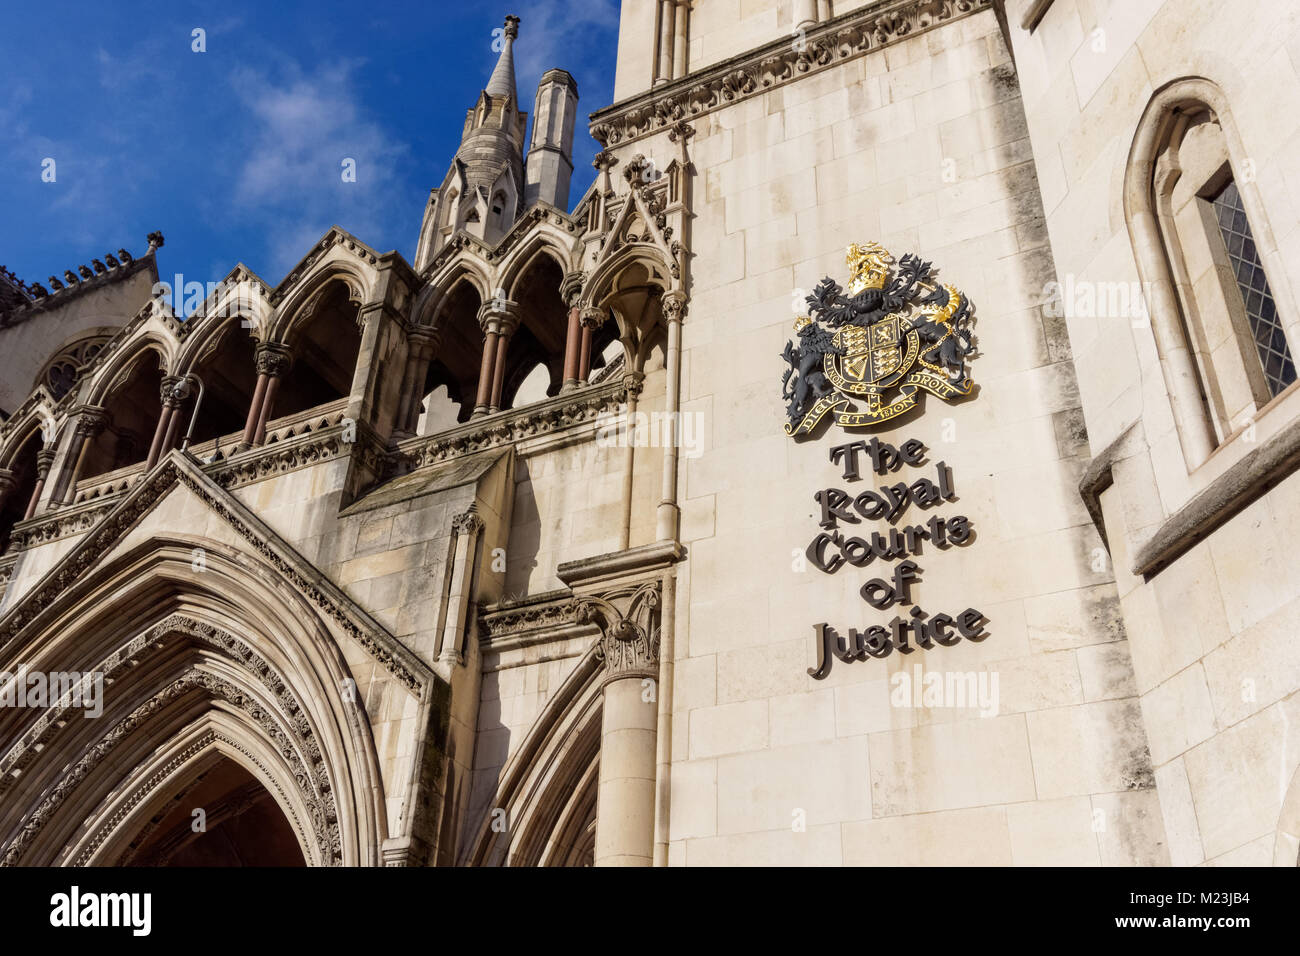 The Royal Courts of Justice on Strand in London, England, United Kingdom, UK Stock Photo